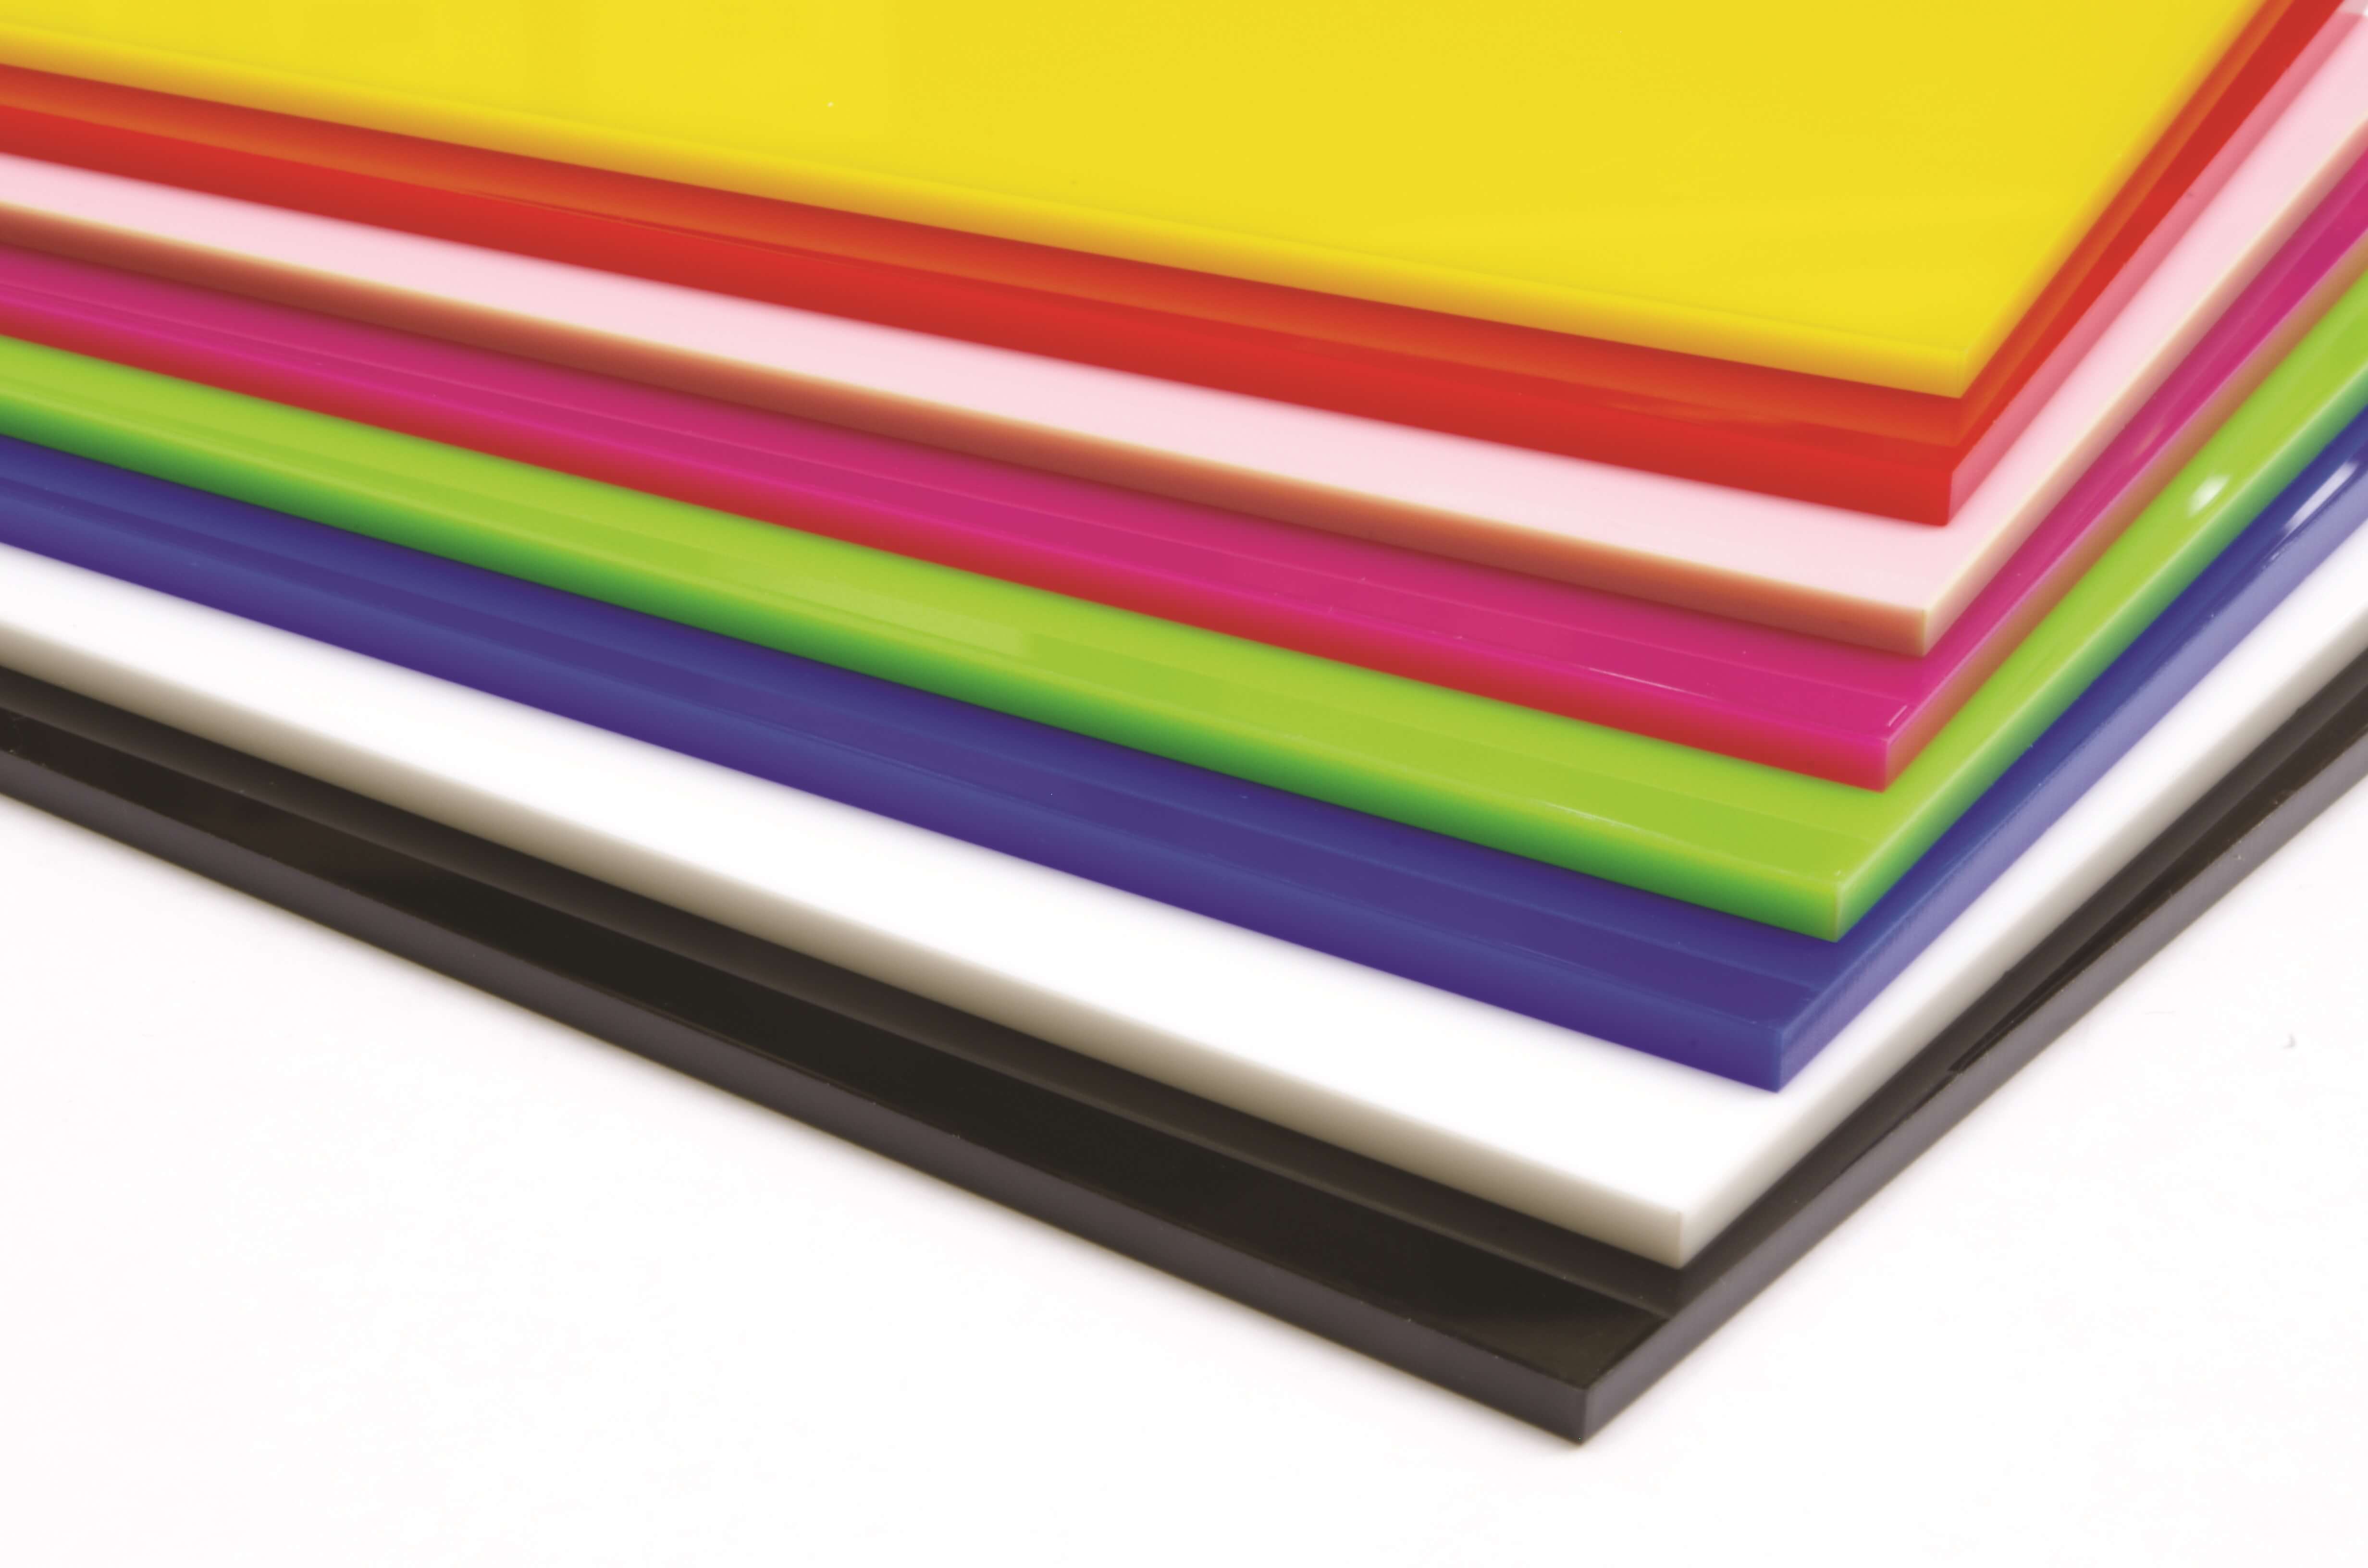 Cast Acrylic 3mm Sheets - 1000 x 500mm Assorted Pack of 8